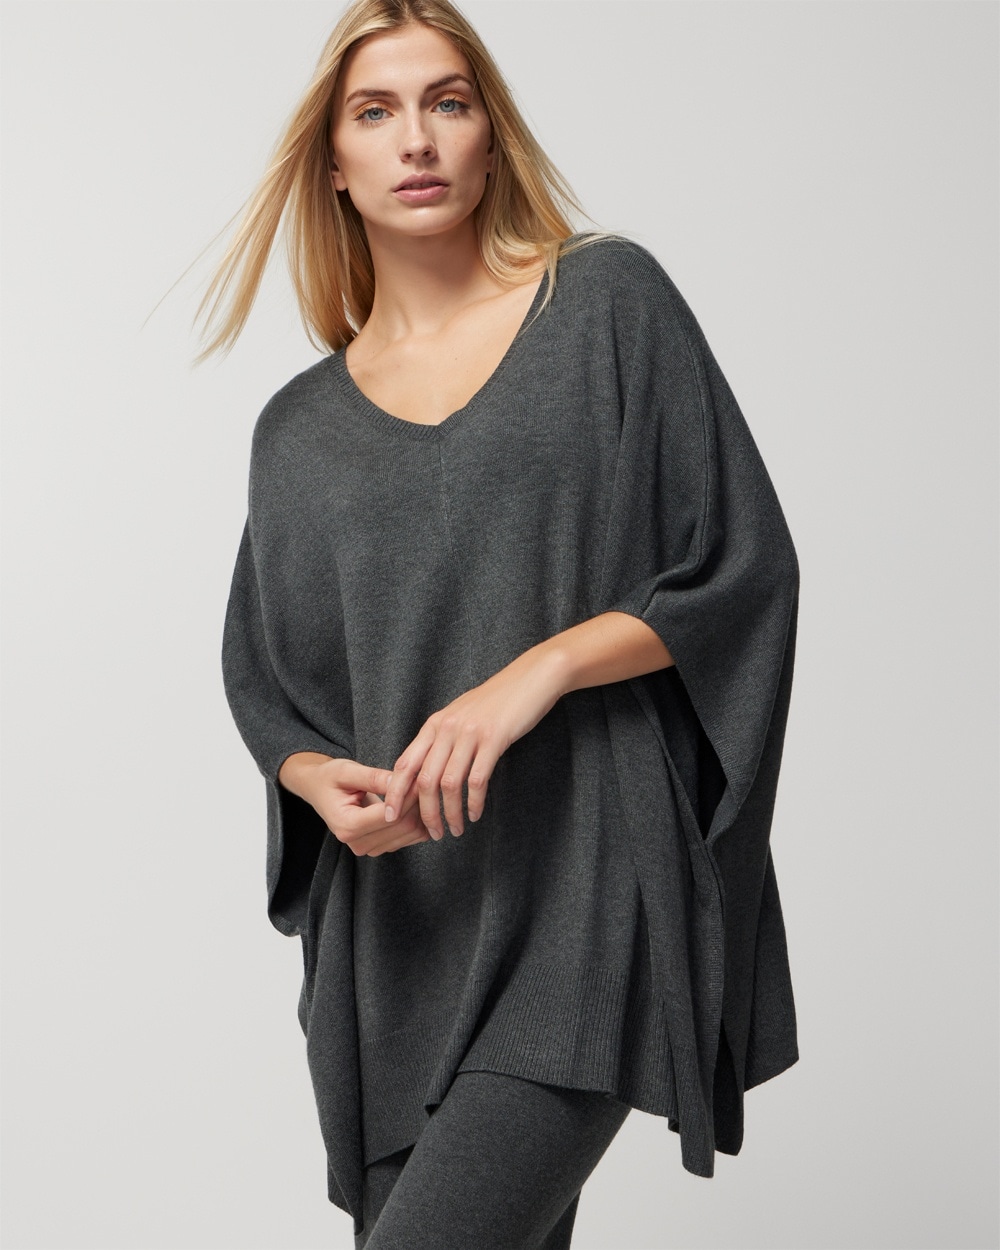 Luxe Soft V-Neck Poncho video preview image, click to start video